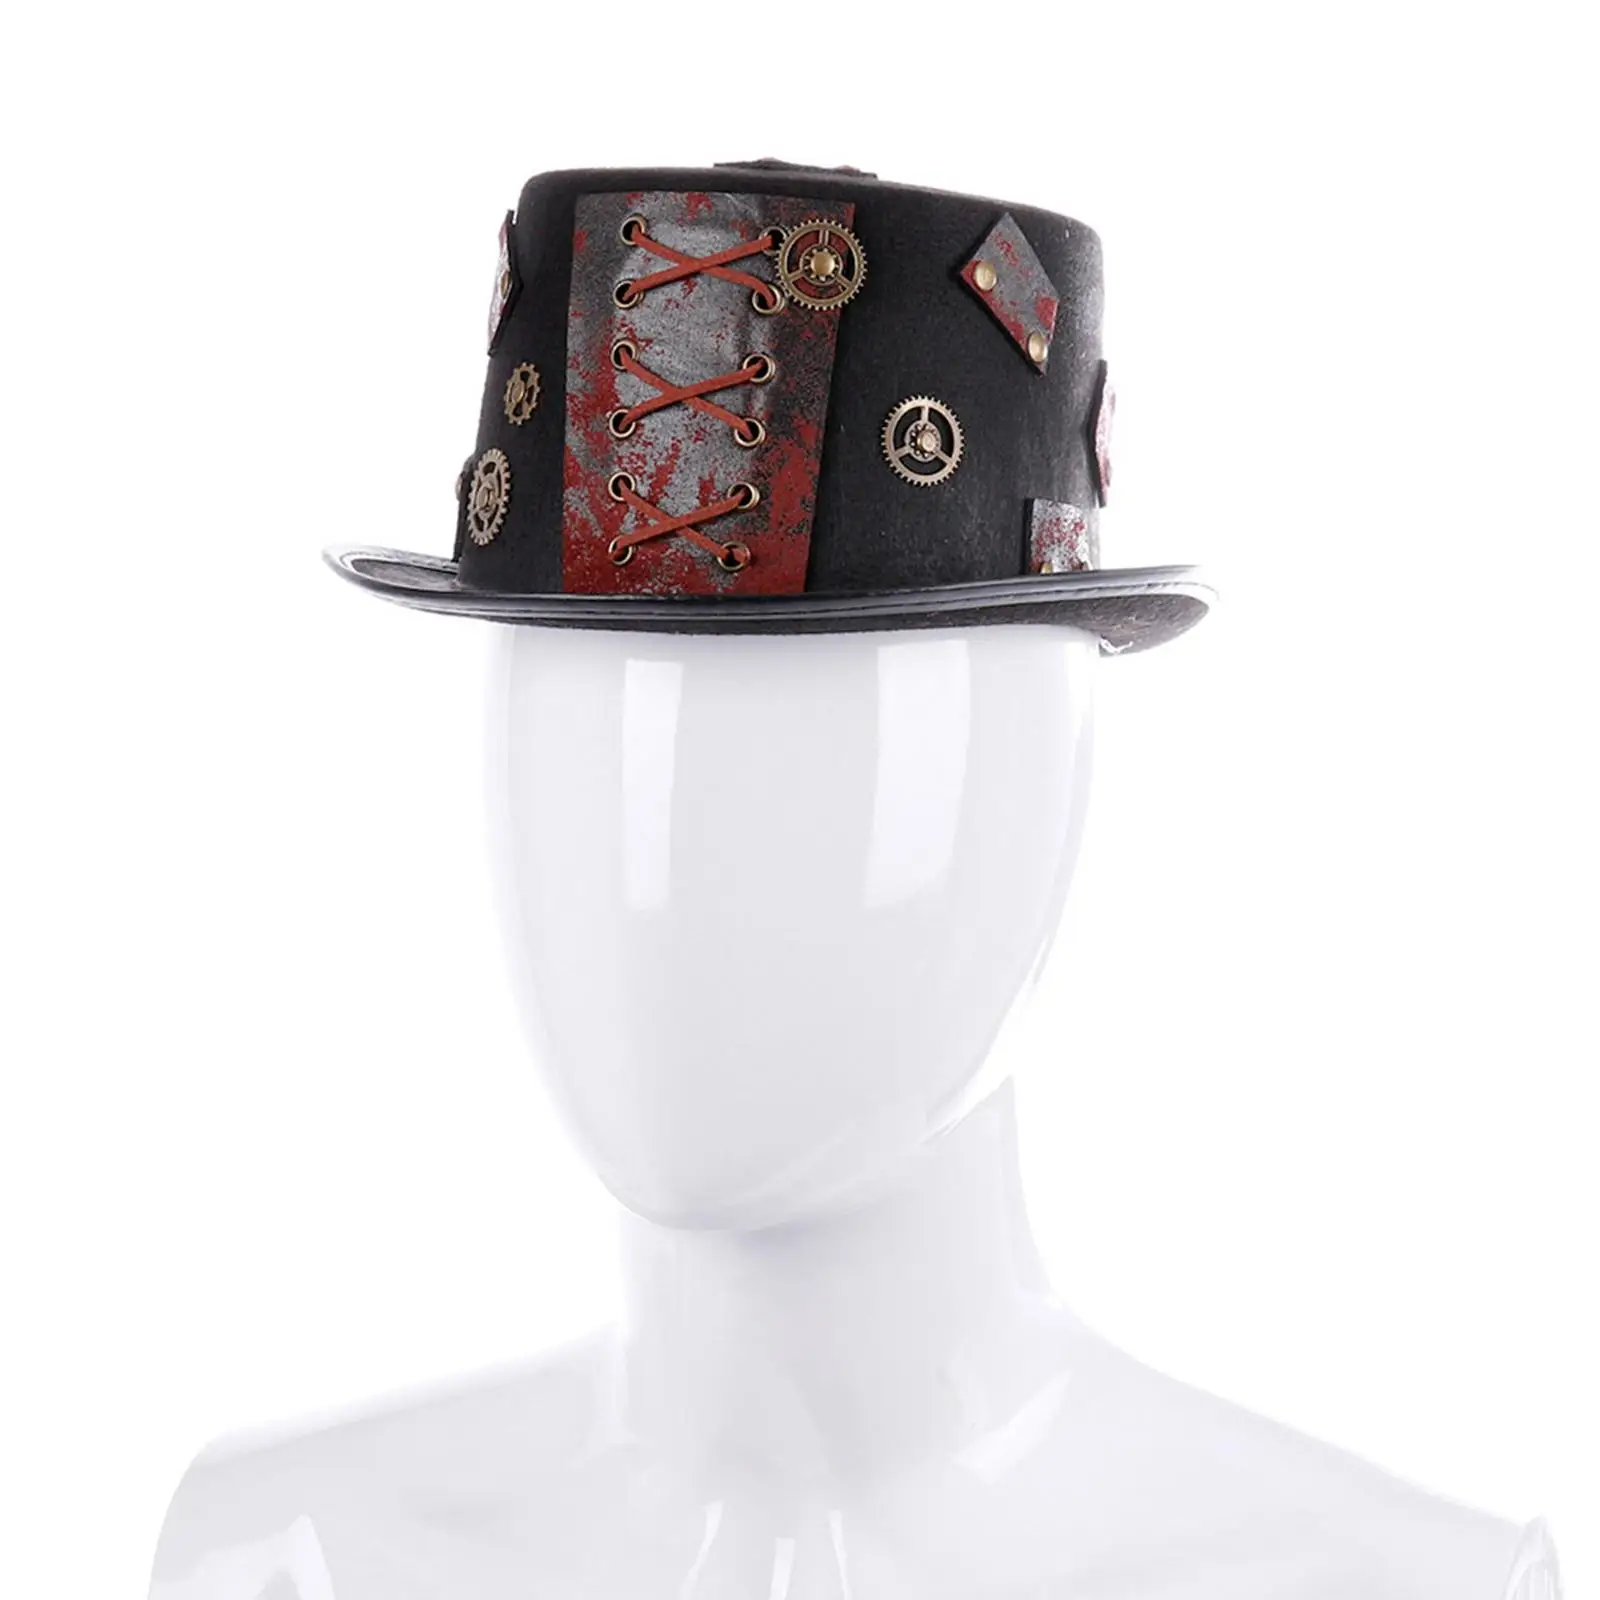 Punk Goth Steampunk Top Hat with String Gear Cosplay Costume Hat, Head Wear Durable Unisex Masquerade Costume Party Accessories